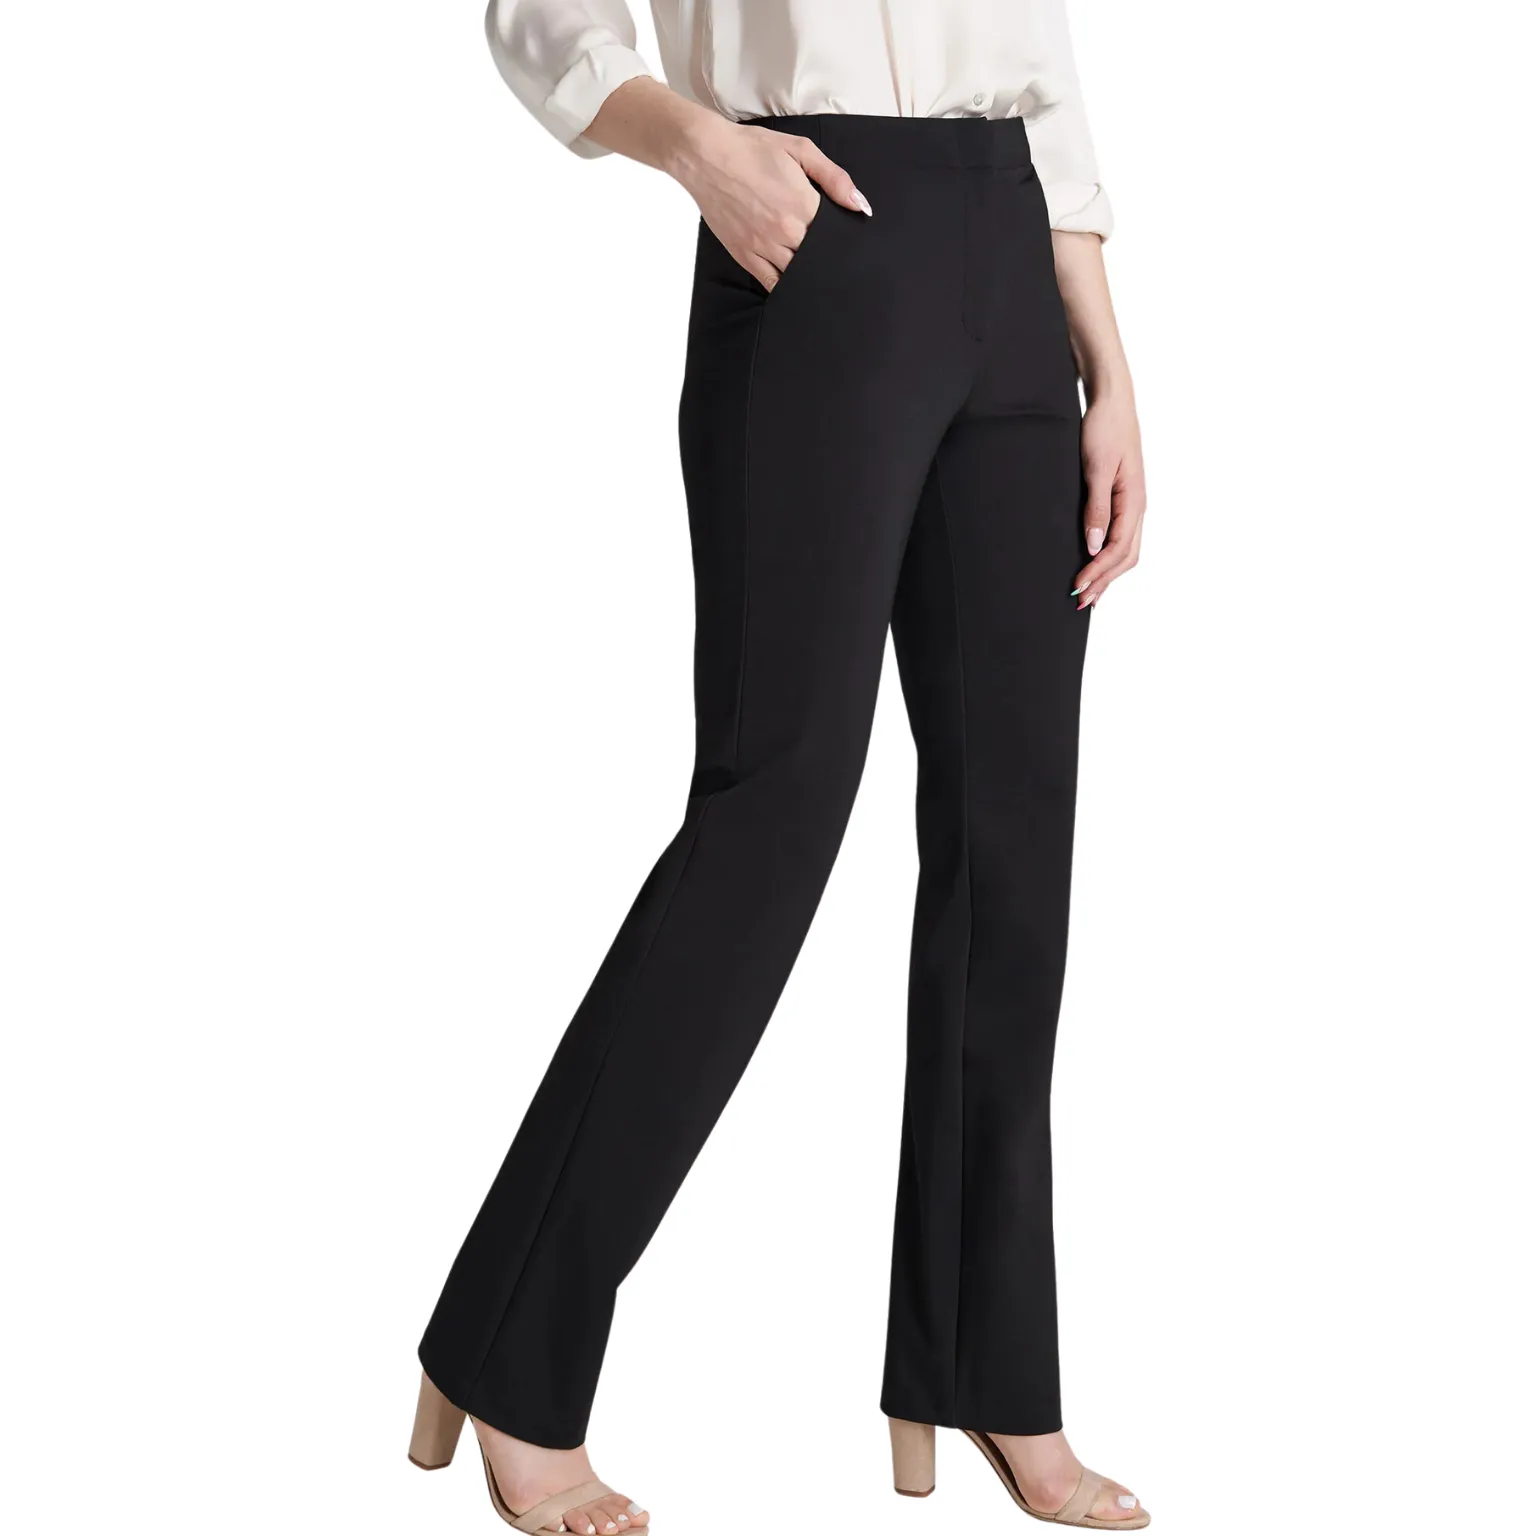 Straight Leg Pants Manufacturing with superior quality